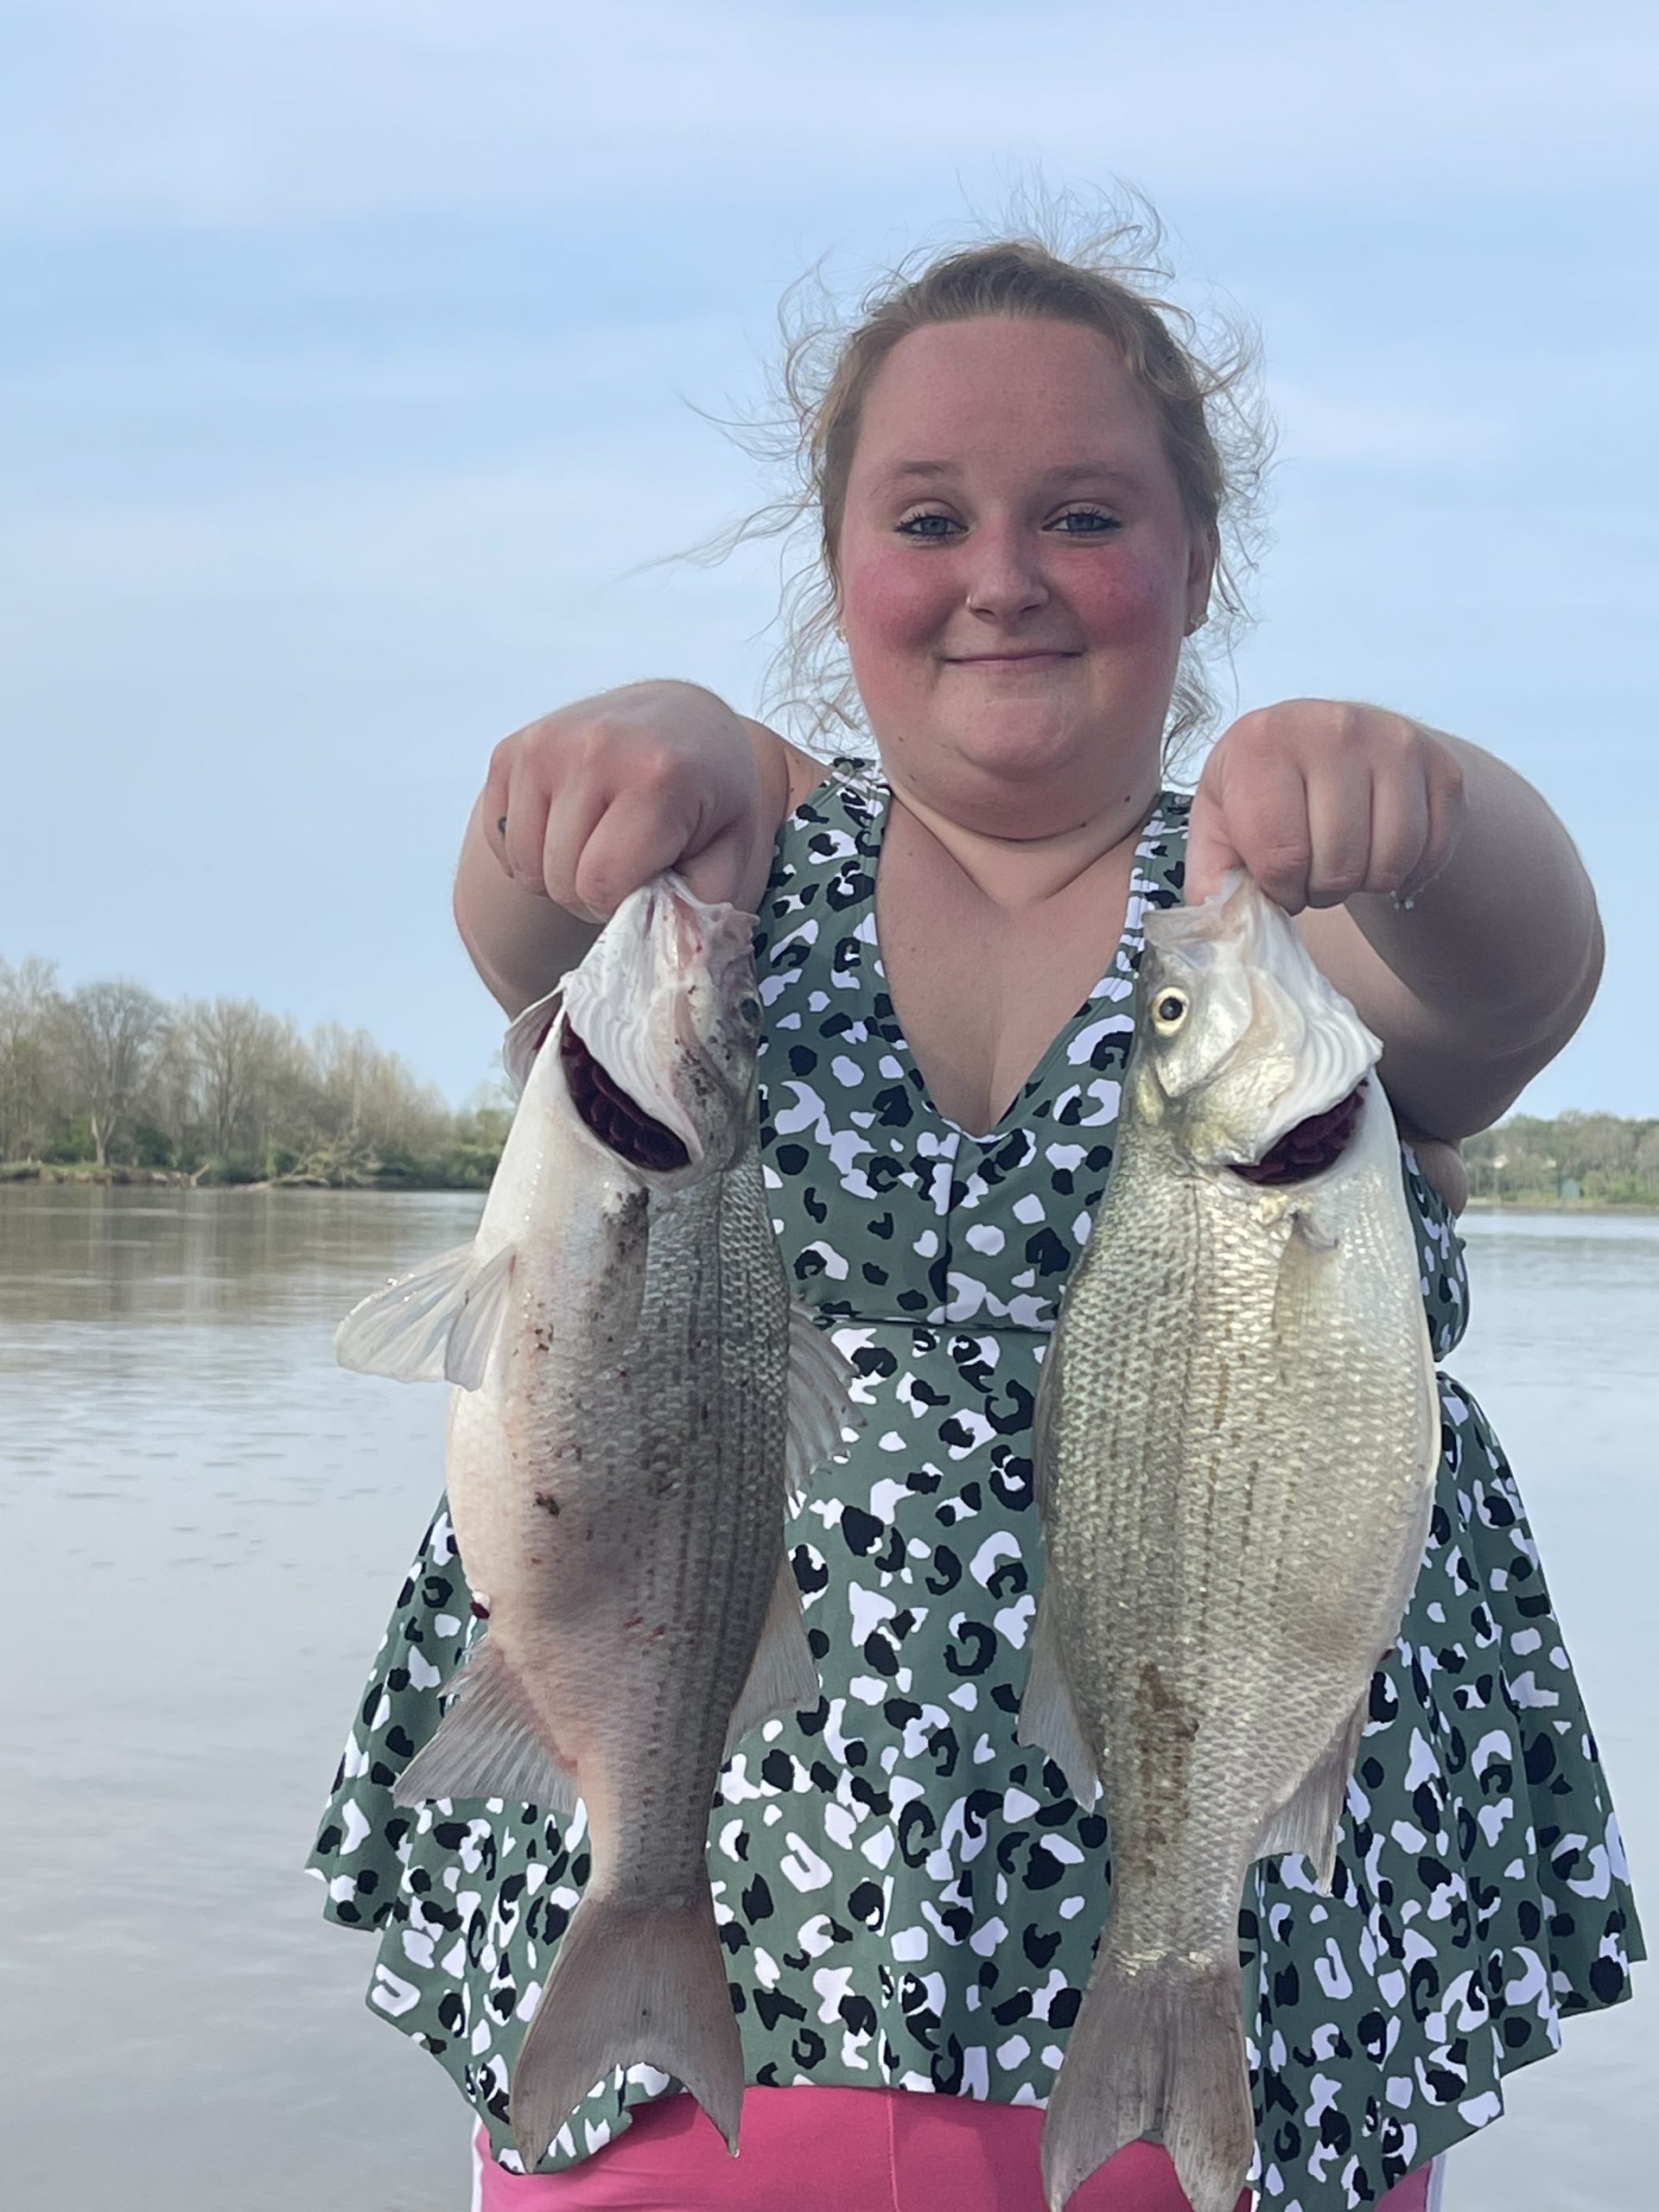 Maumee River report, May 12, 2022